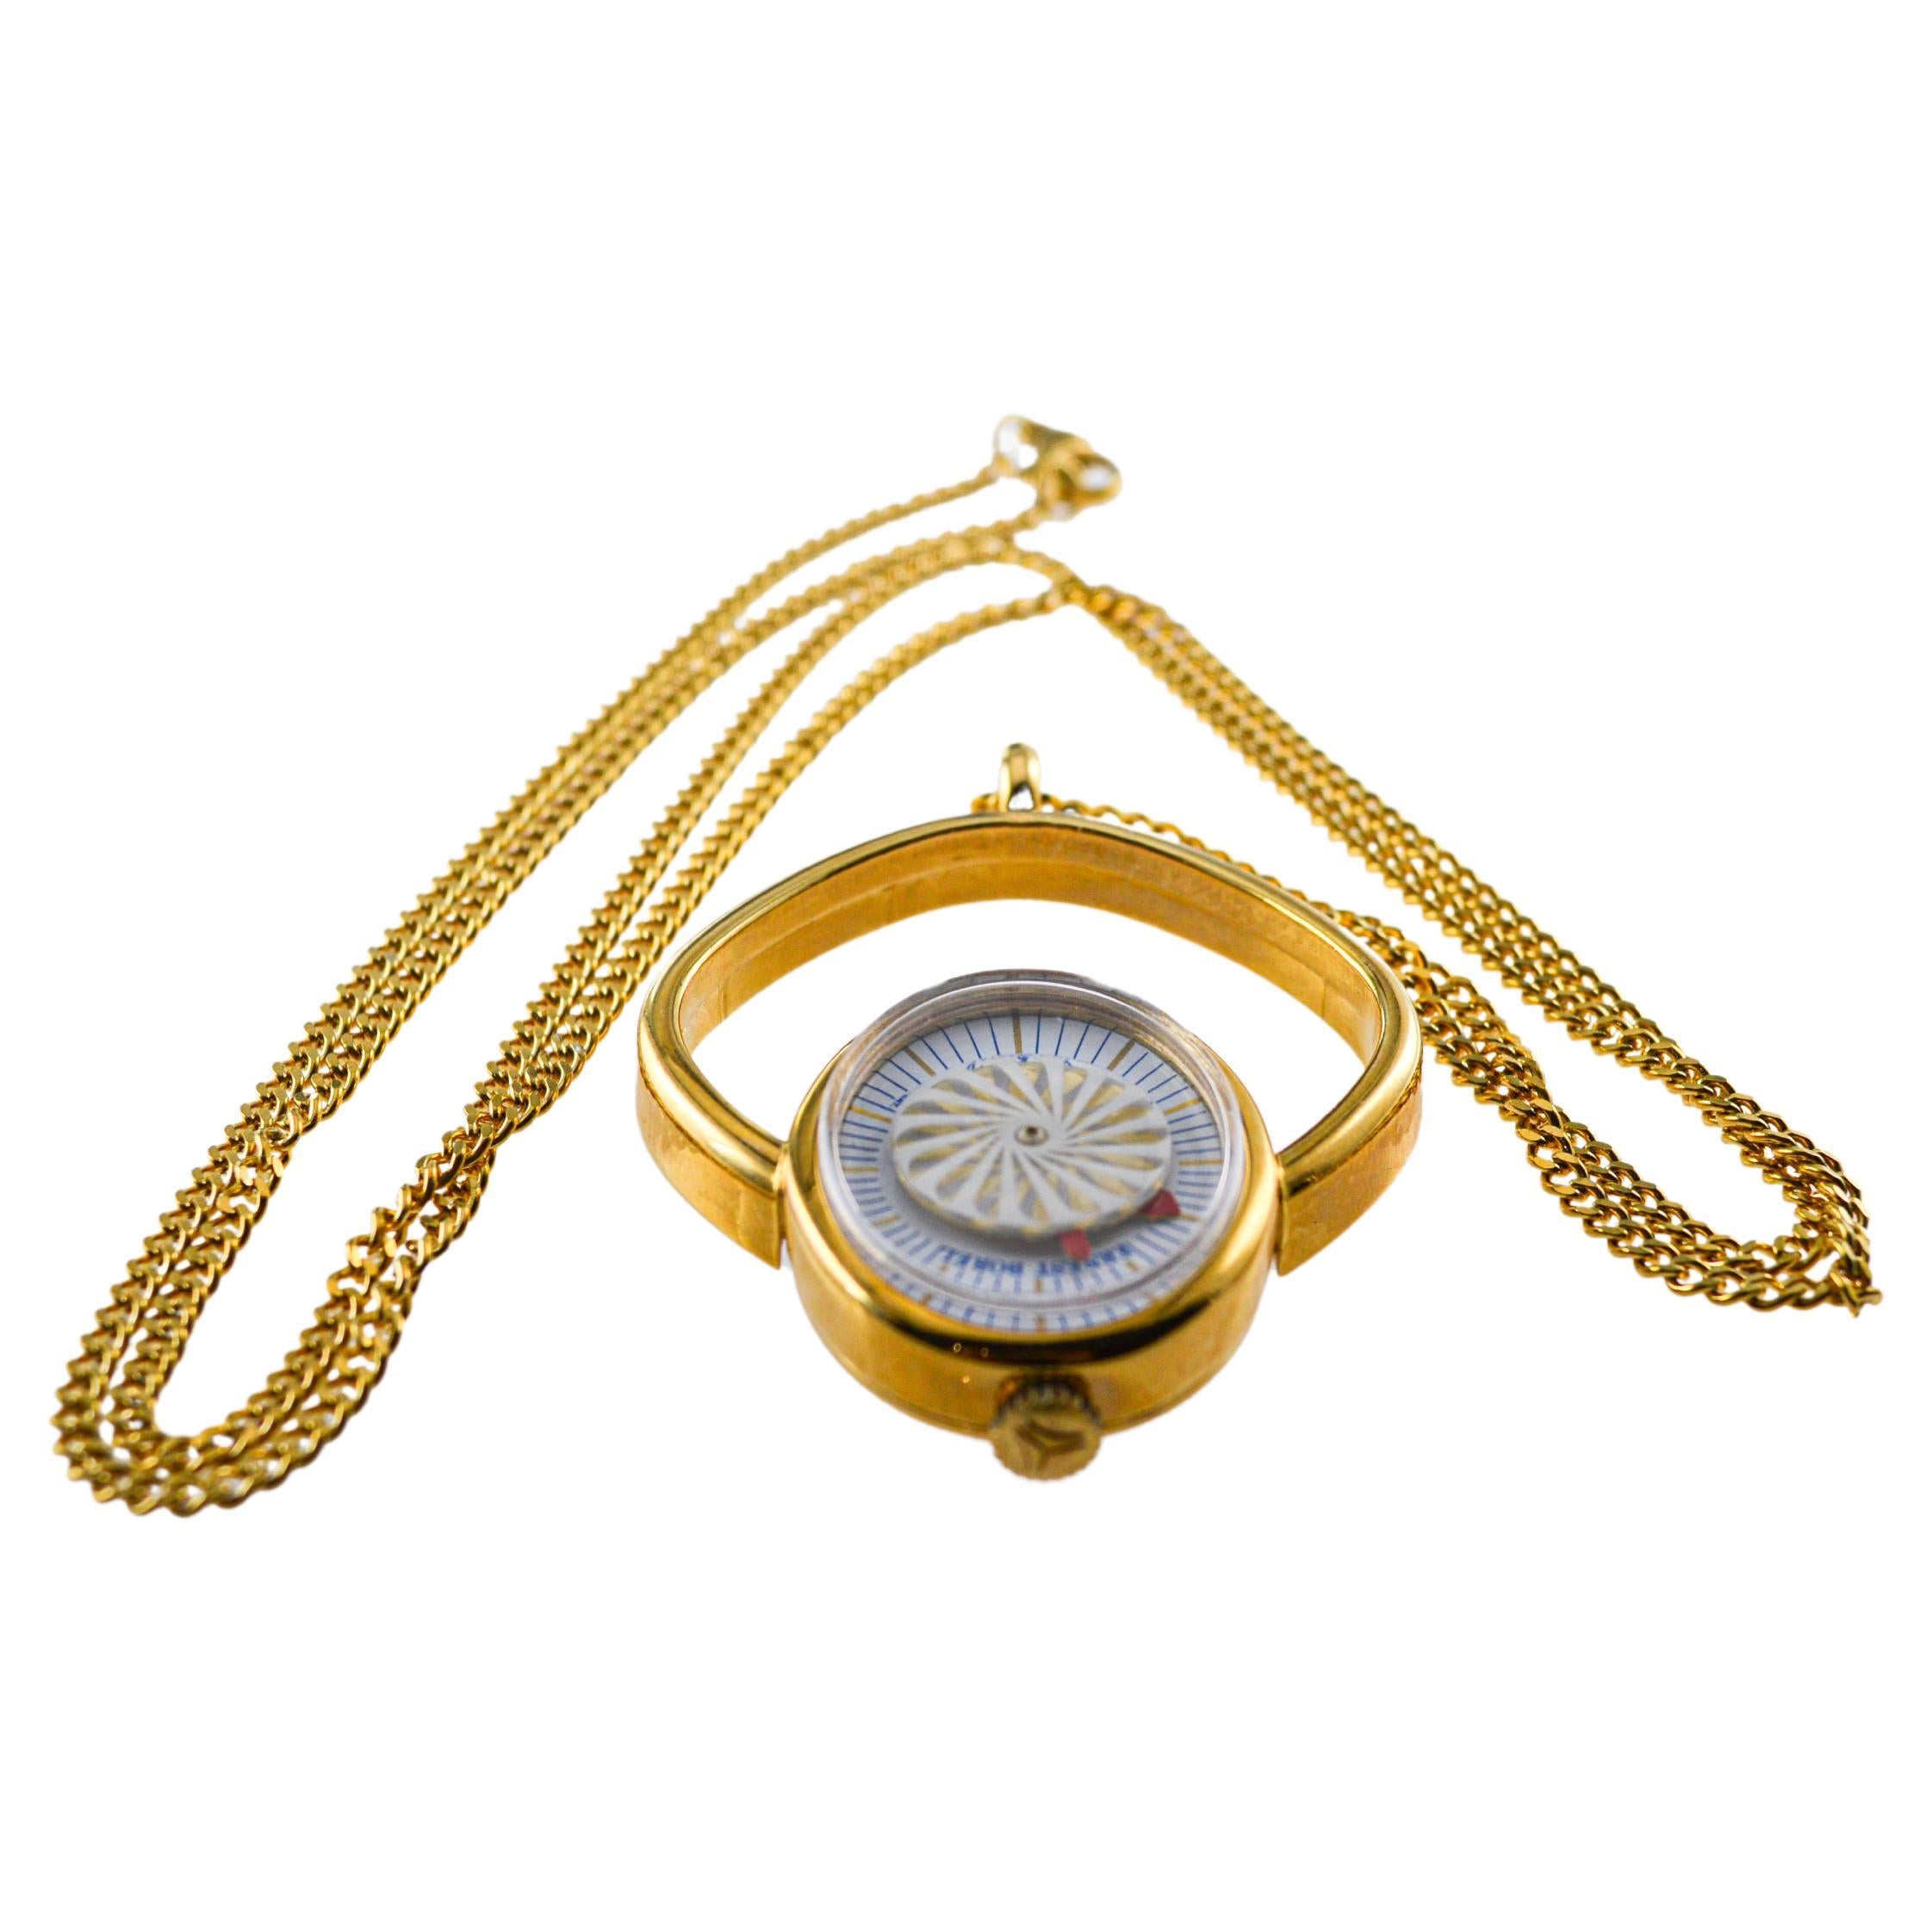 FACTORY / HOUSE: Ernest Borel Watch Company
STYLE / REFERENCE: Pendant Watch / N.O.S.
METAL / MATERIAL: Yellow Gold Filled
CIRCA / YEAR: 1960's
DIMENSIONS / SIZE: Length 41mm X Diameter 35mm
MOVEMENT / CALIBER: Manual Winding / 17 Jewels 
DIAL /